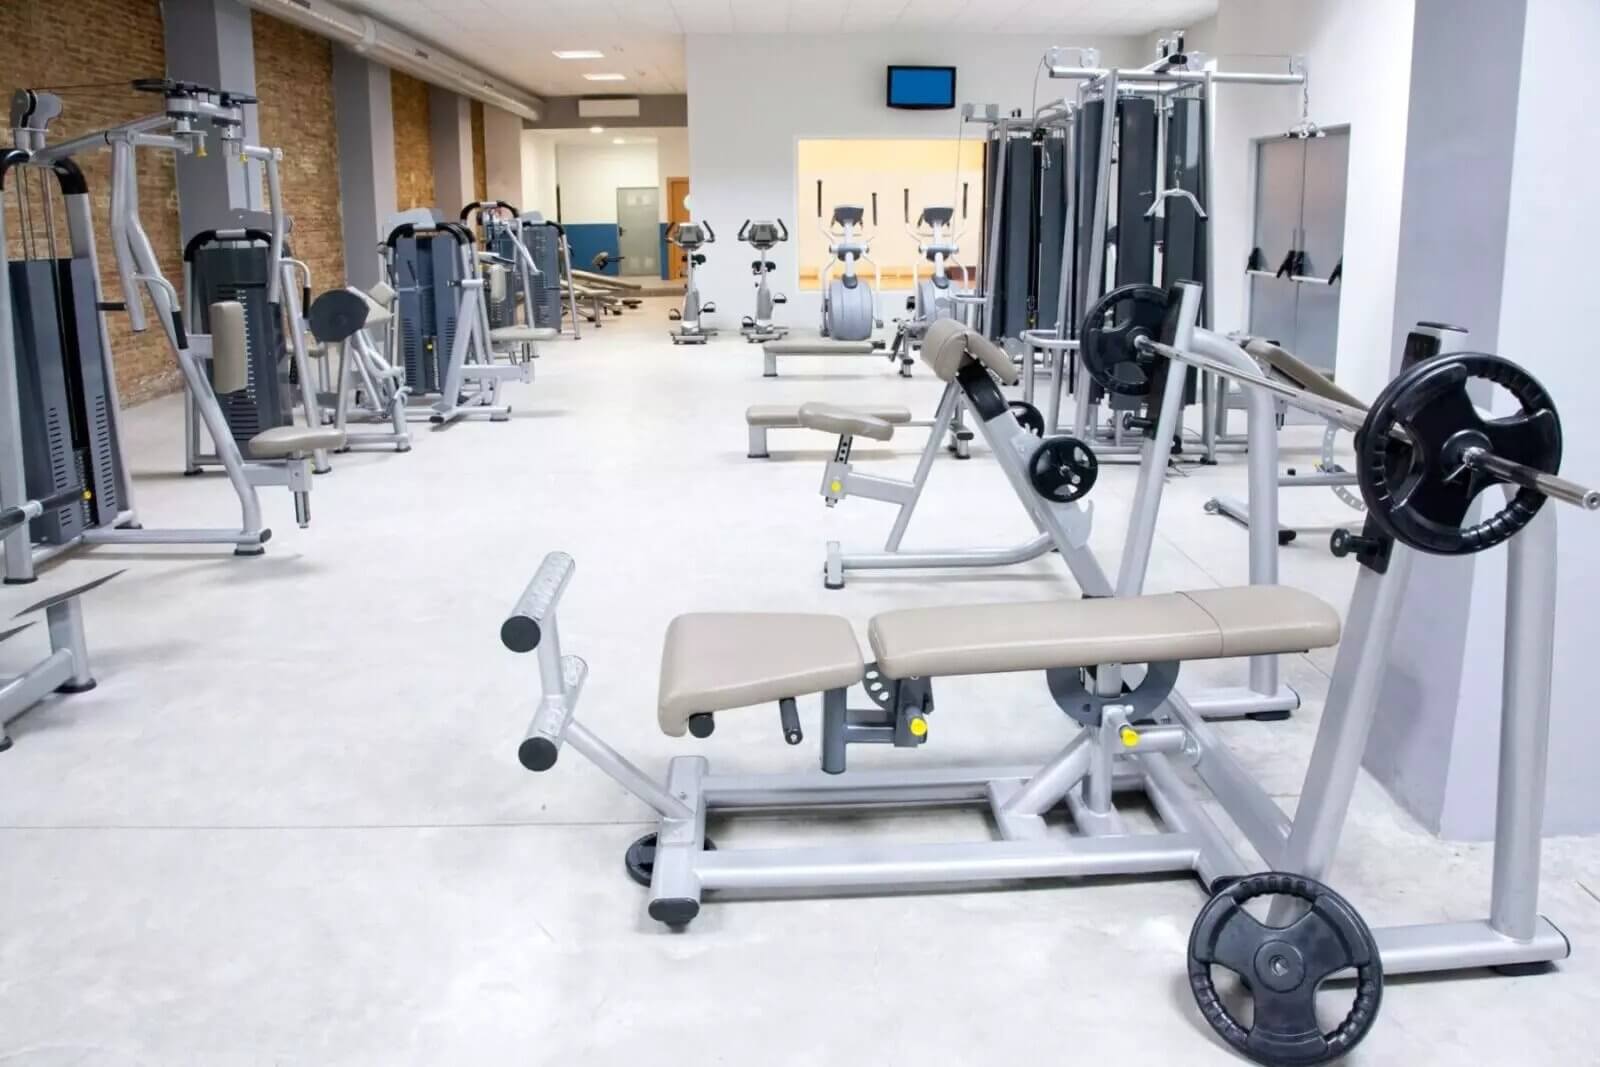 Inside a brightly lit gym with multiple workout equipment.